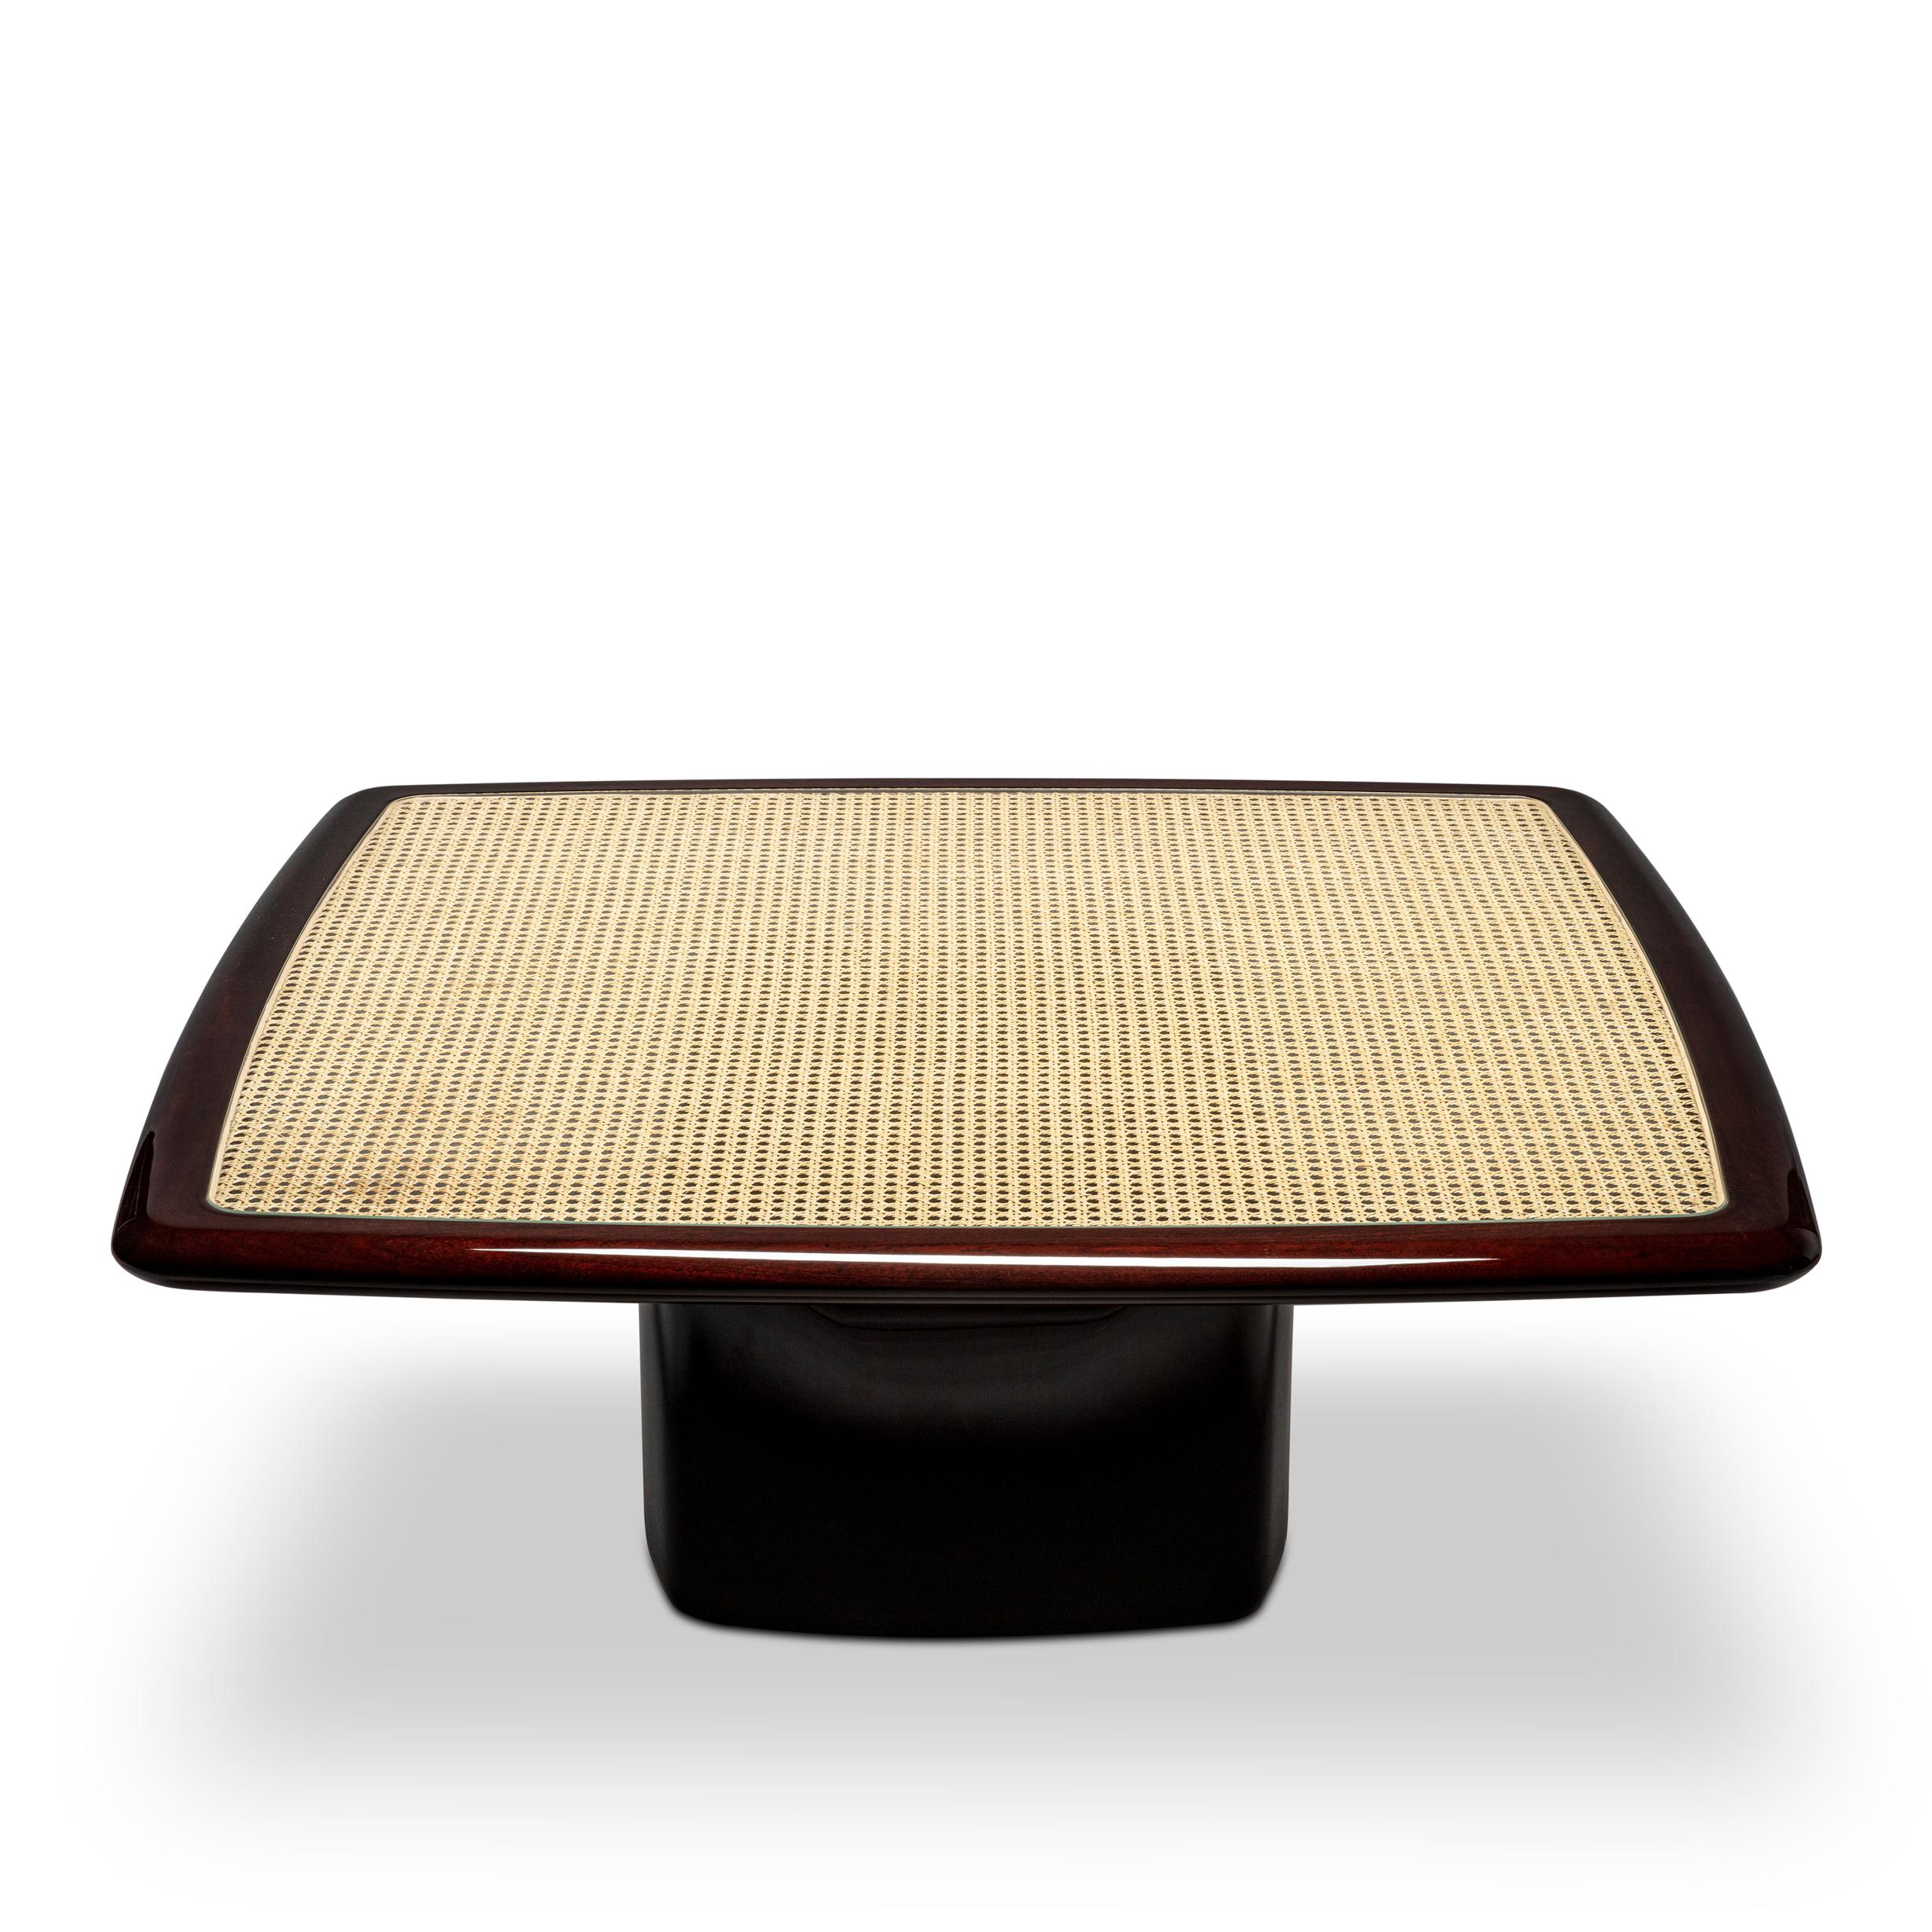 Bossa Square Coffee Table Mahogany Solid Wood, Handcrafted in Portugal by Duistt

The “bossa” collection is inspired by the subtlety, particular charm and harmonious simplicity of the brazilian music movement that emerged in the late 50’s, “bossa